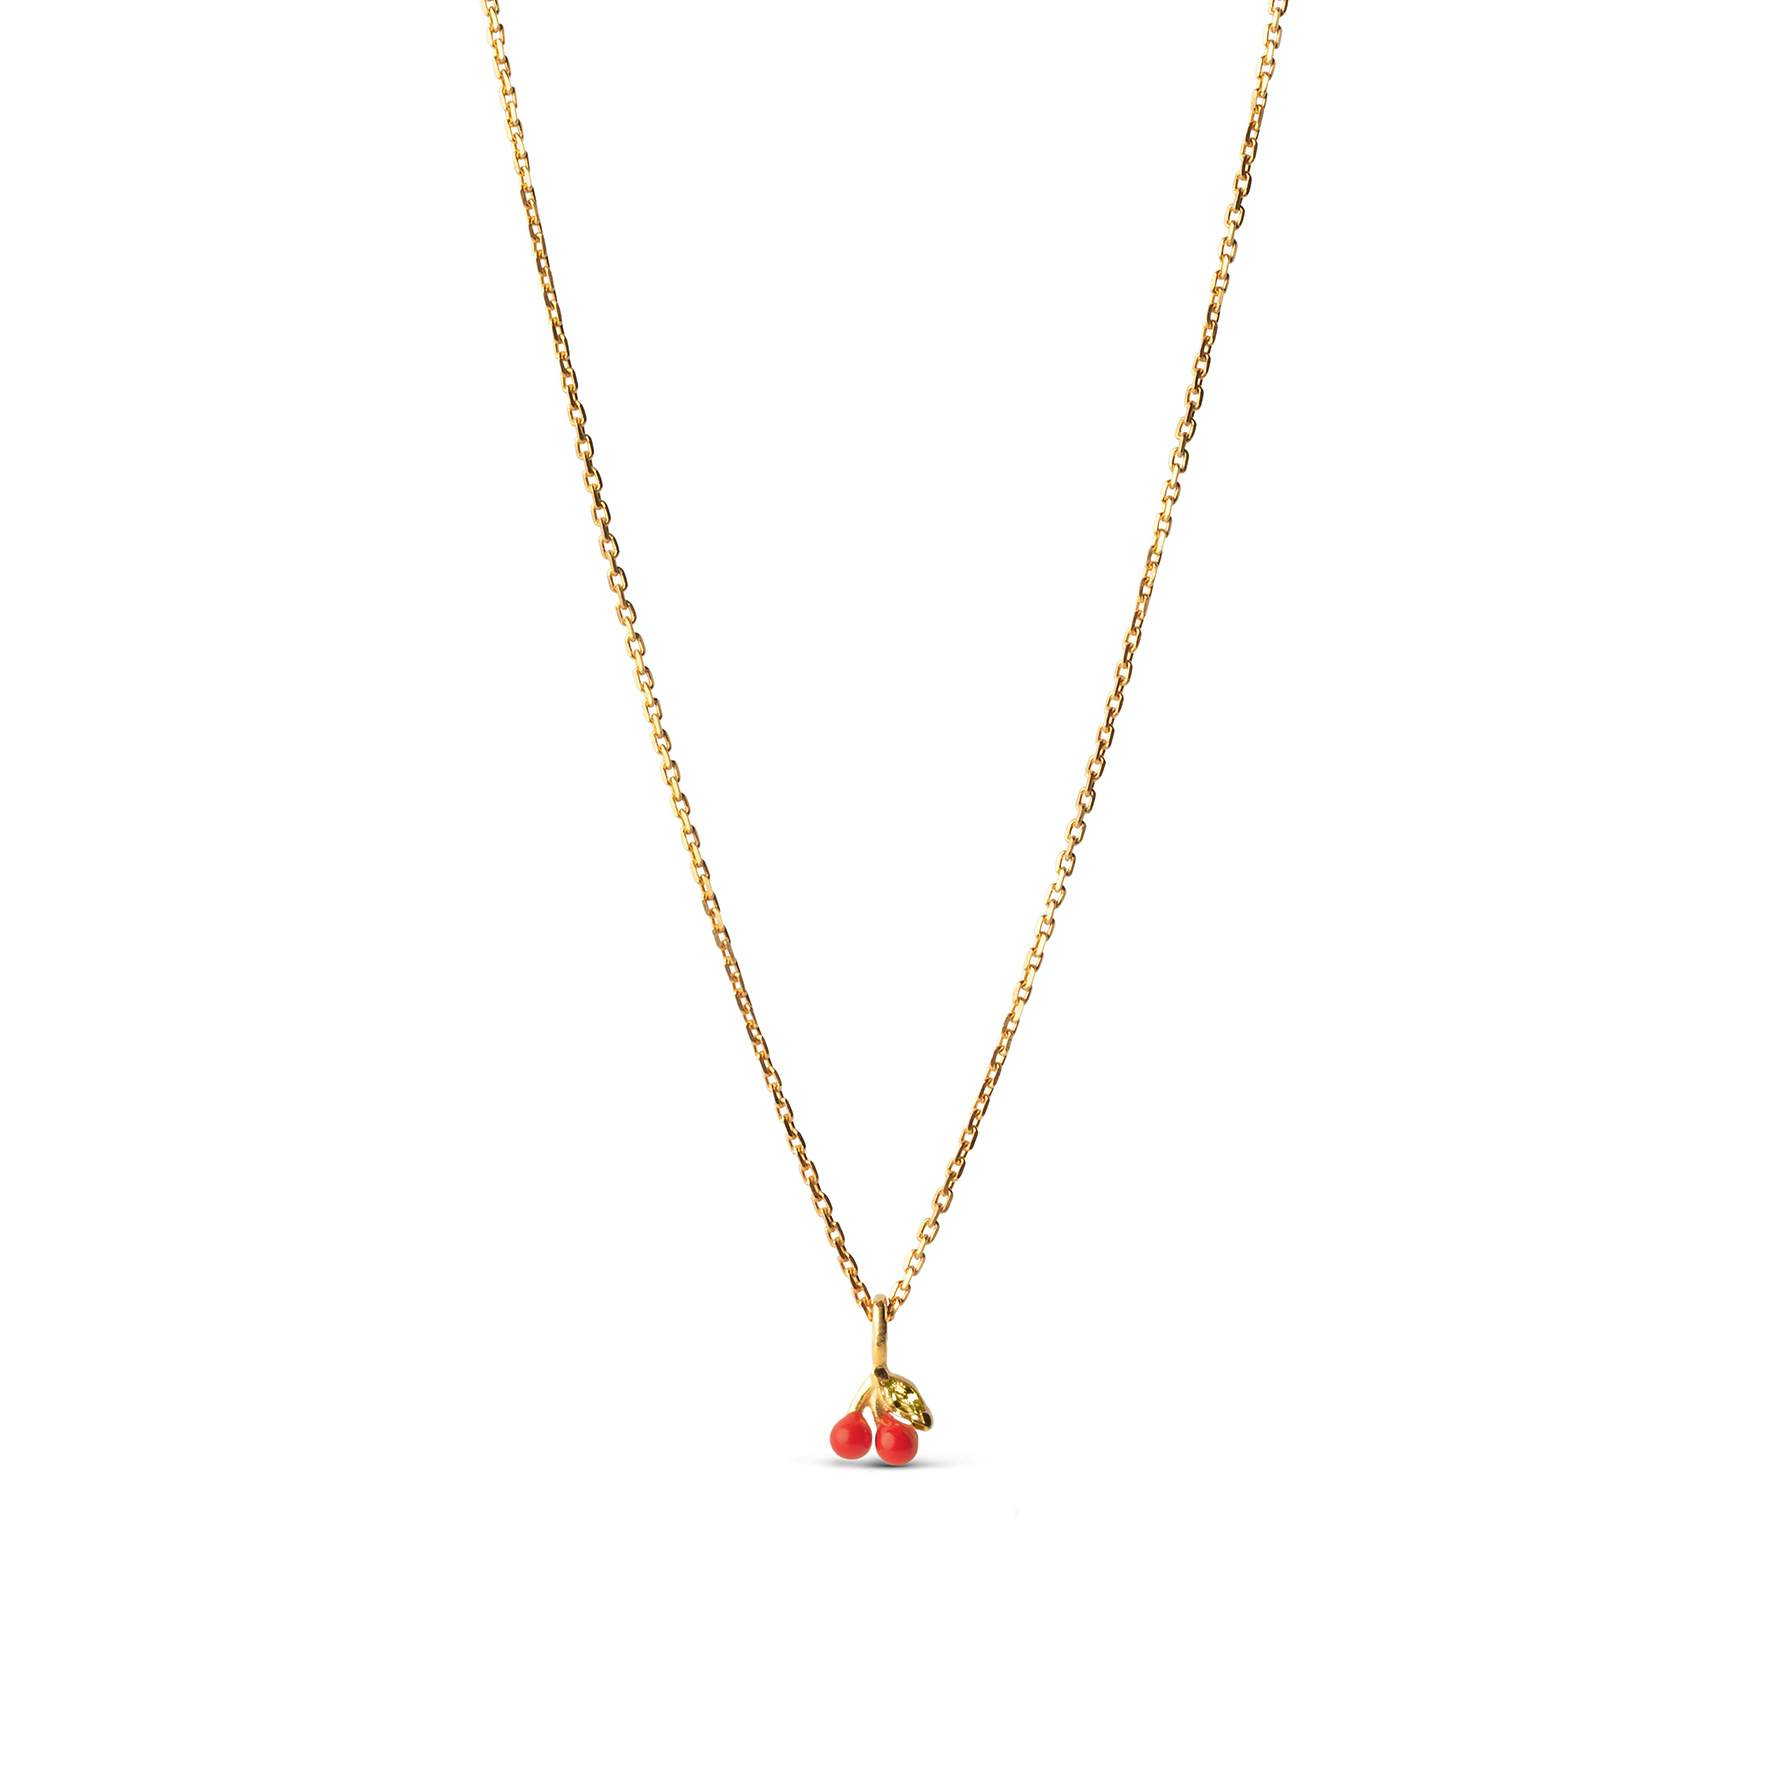 Cherry Necklace Coral from Enamel Copenhagen in Goldplated-Silver Sterling 925